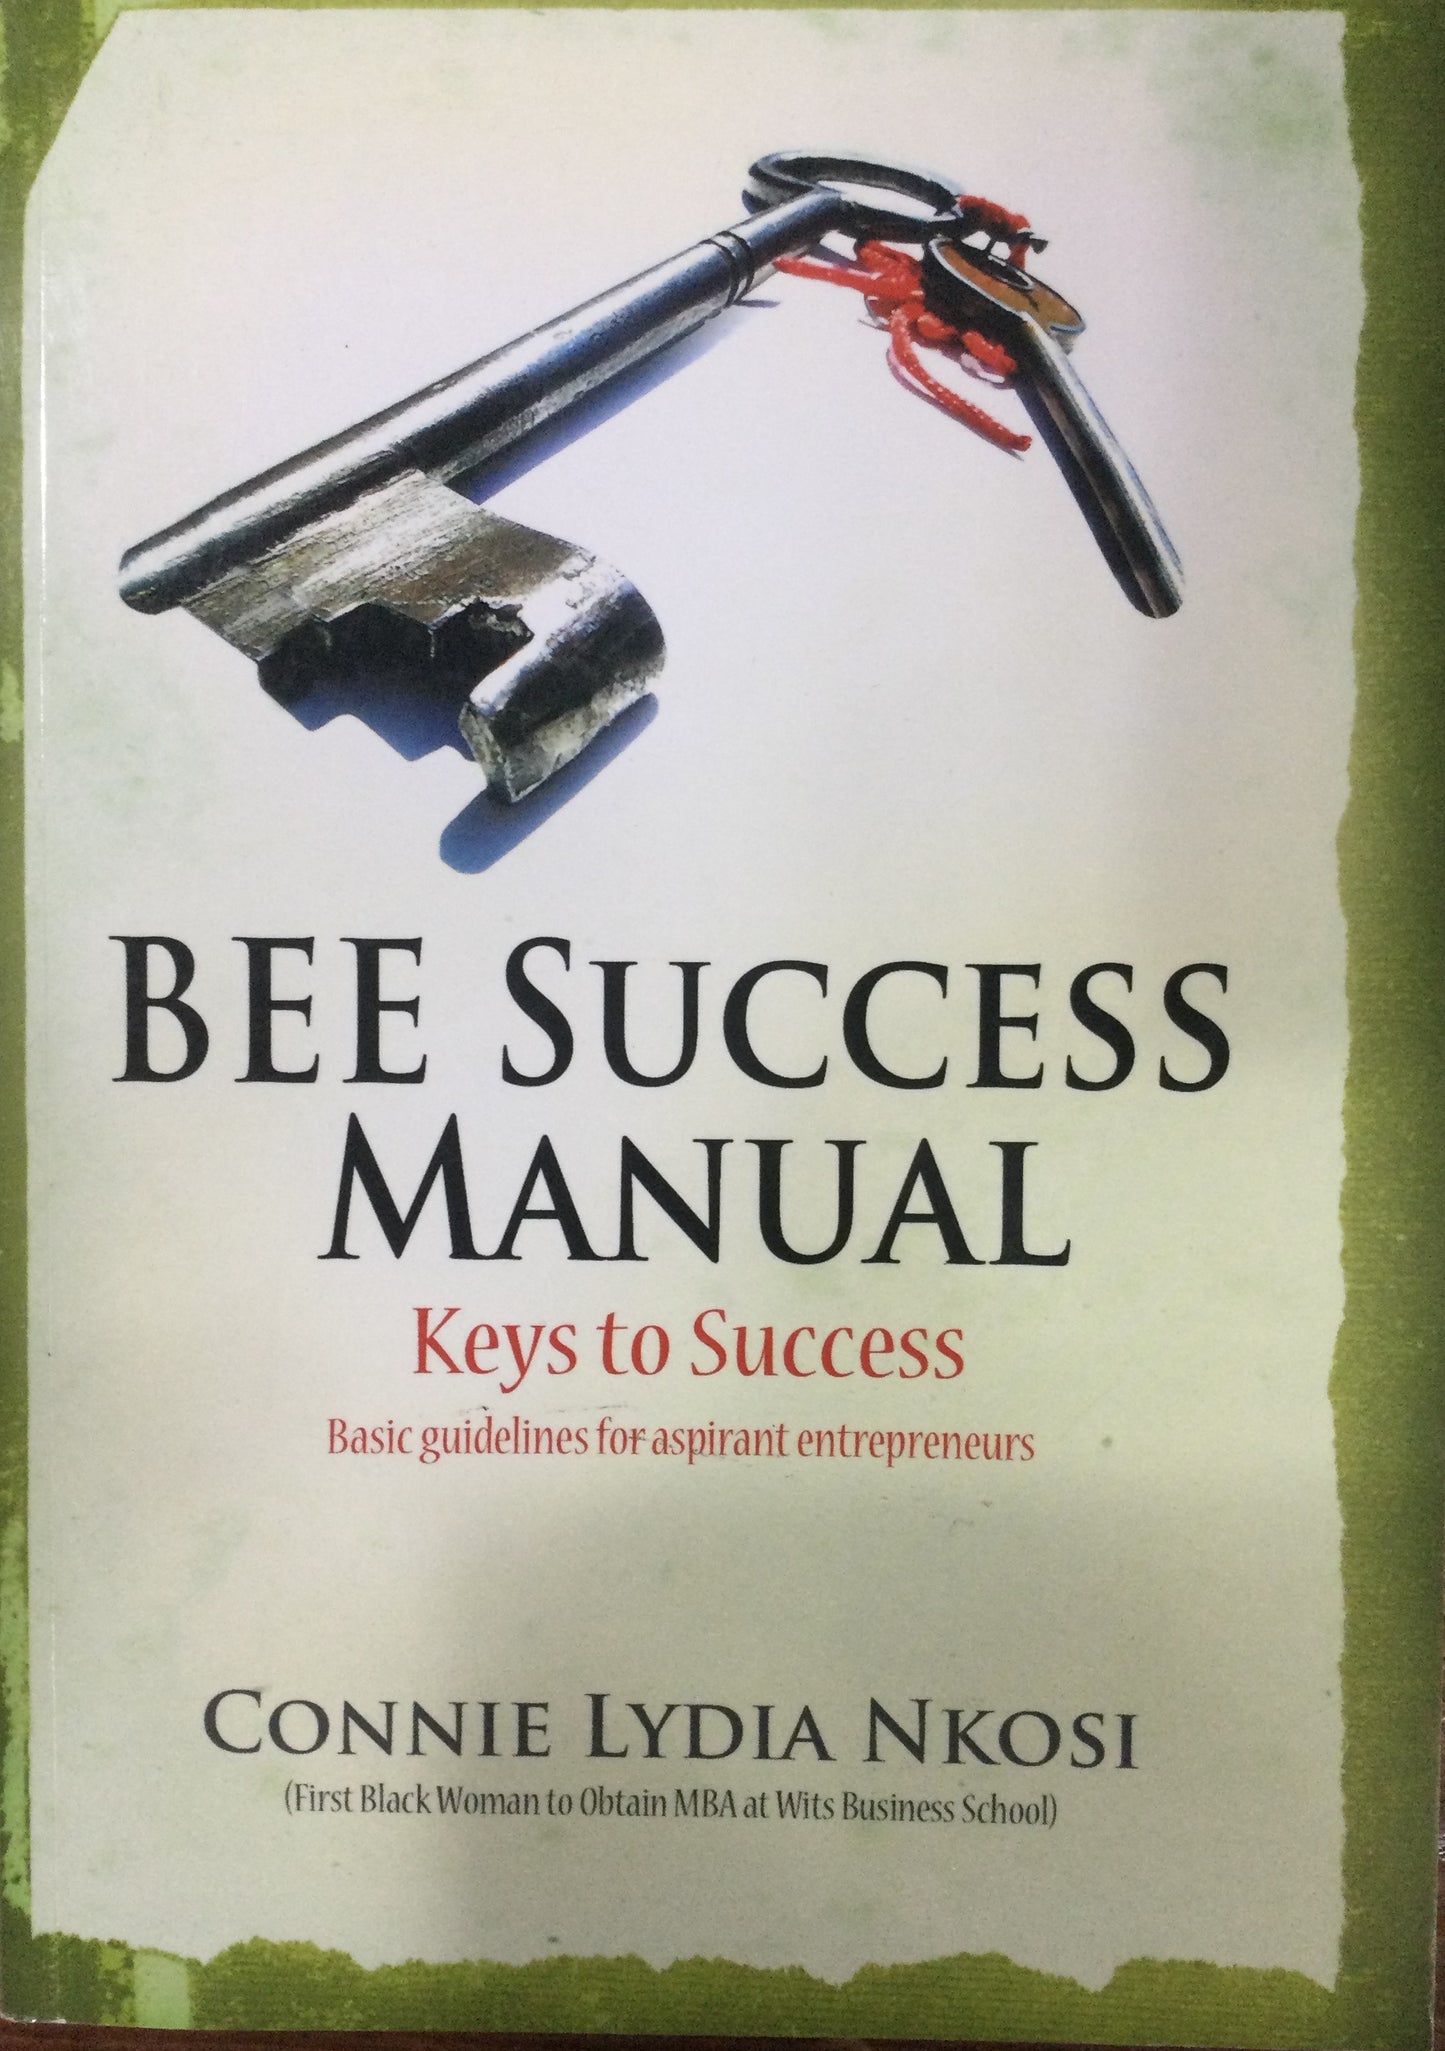 BEE Success Manual: Keys to Success, by Connie Lydia Nkosi